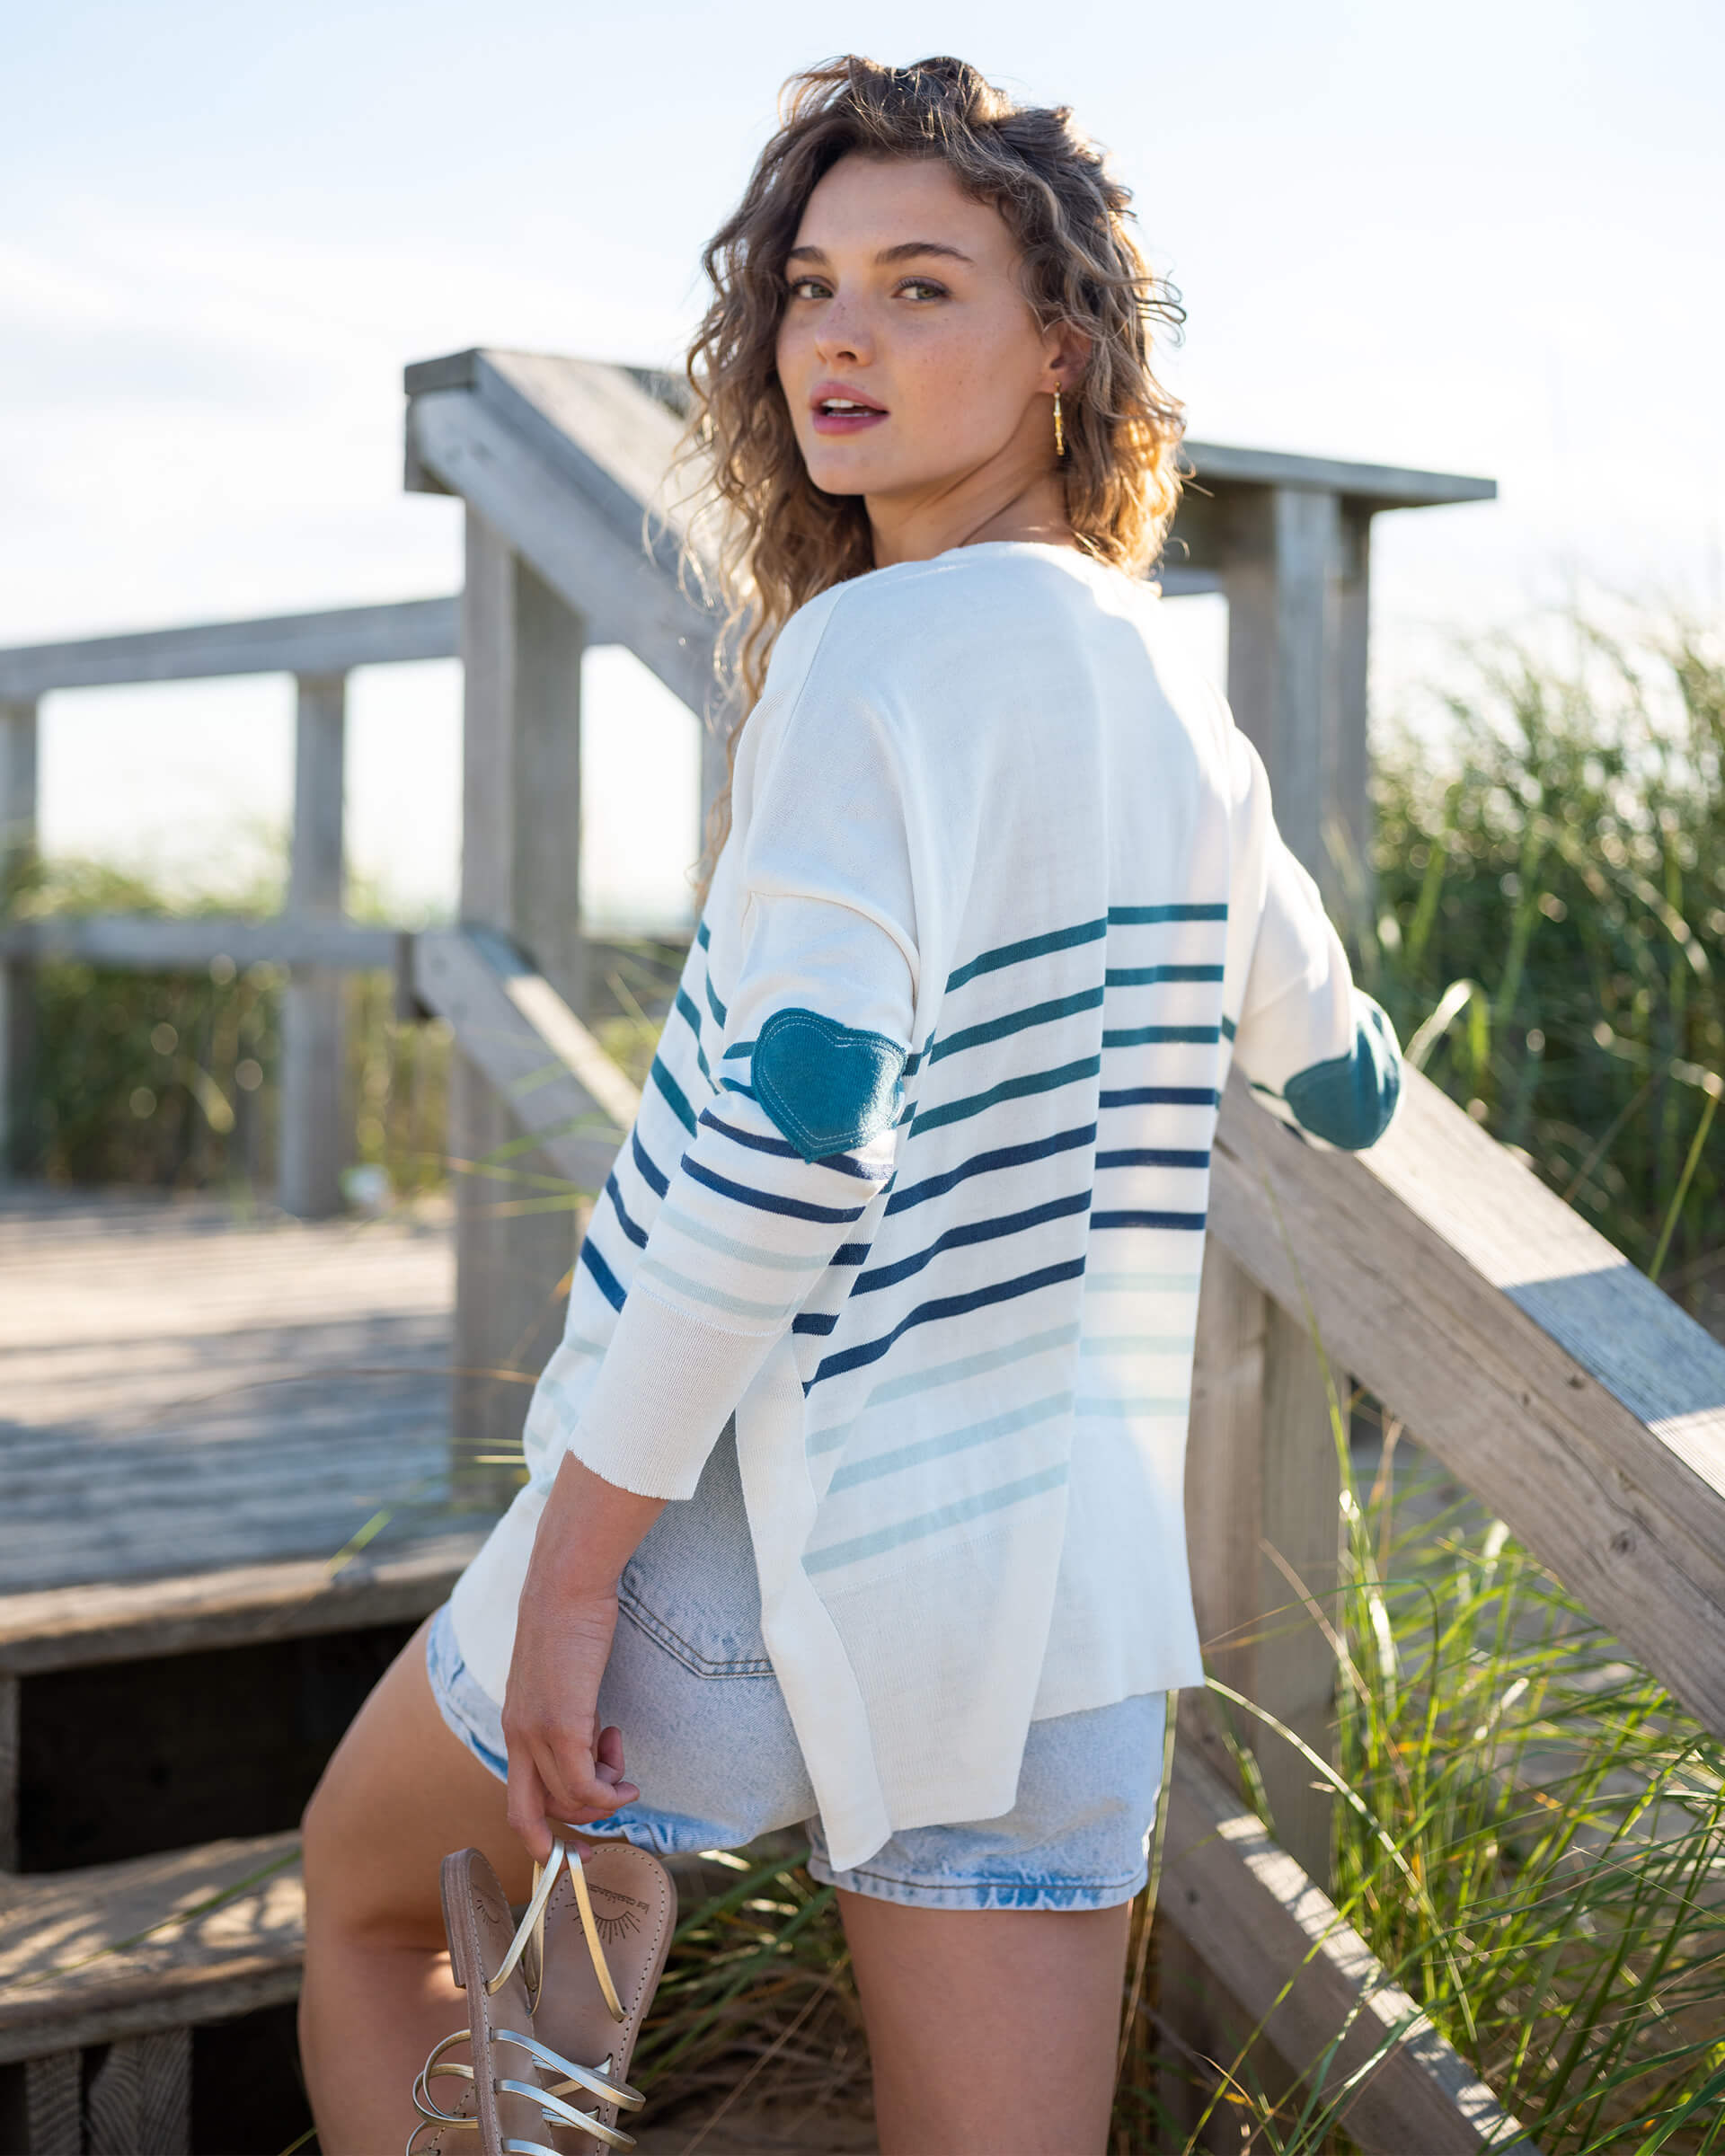 female wearing a white sweater with blue stripes and blue heart walking up stairs on the beach